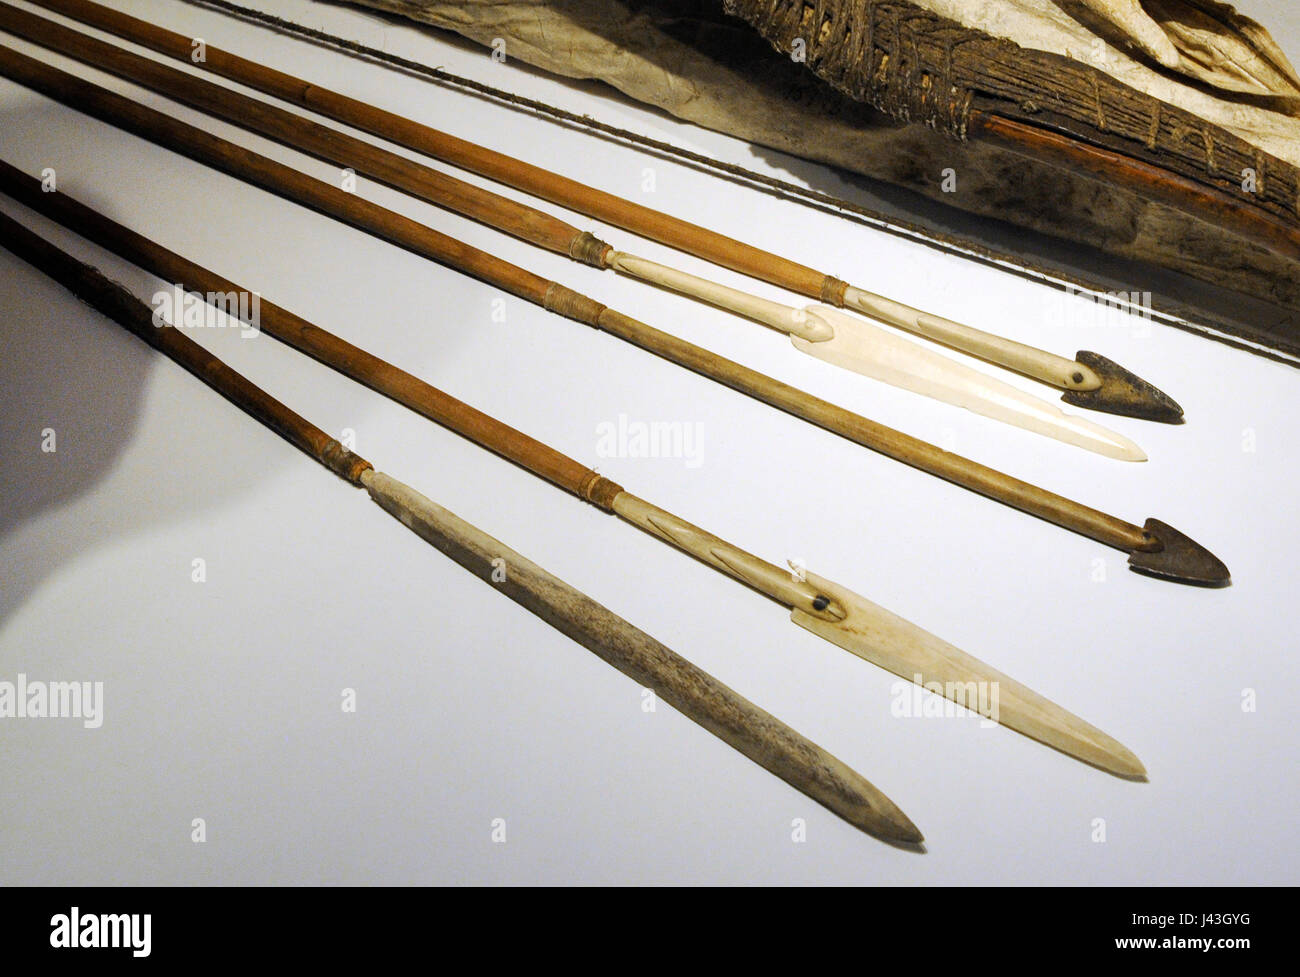 Eskimo peoples. Inuit. Seals hunting with kayaks in the open seas around Greenland. Spears. Exhibition of clothing and Eskimo objects. Historical Museum. Oslo. Norway. Stock Photo